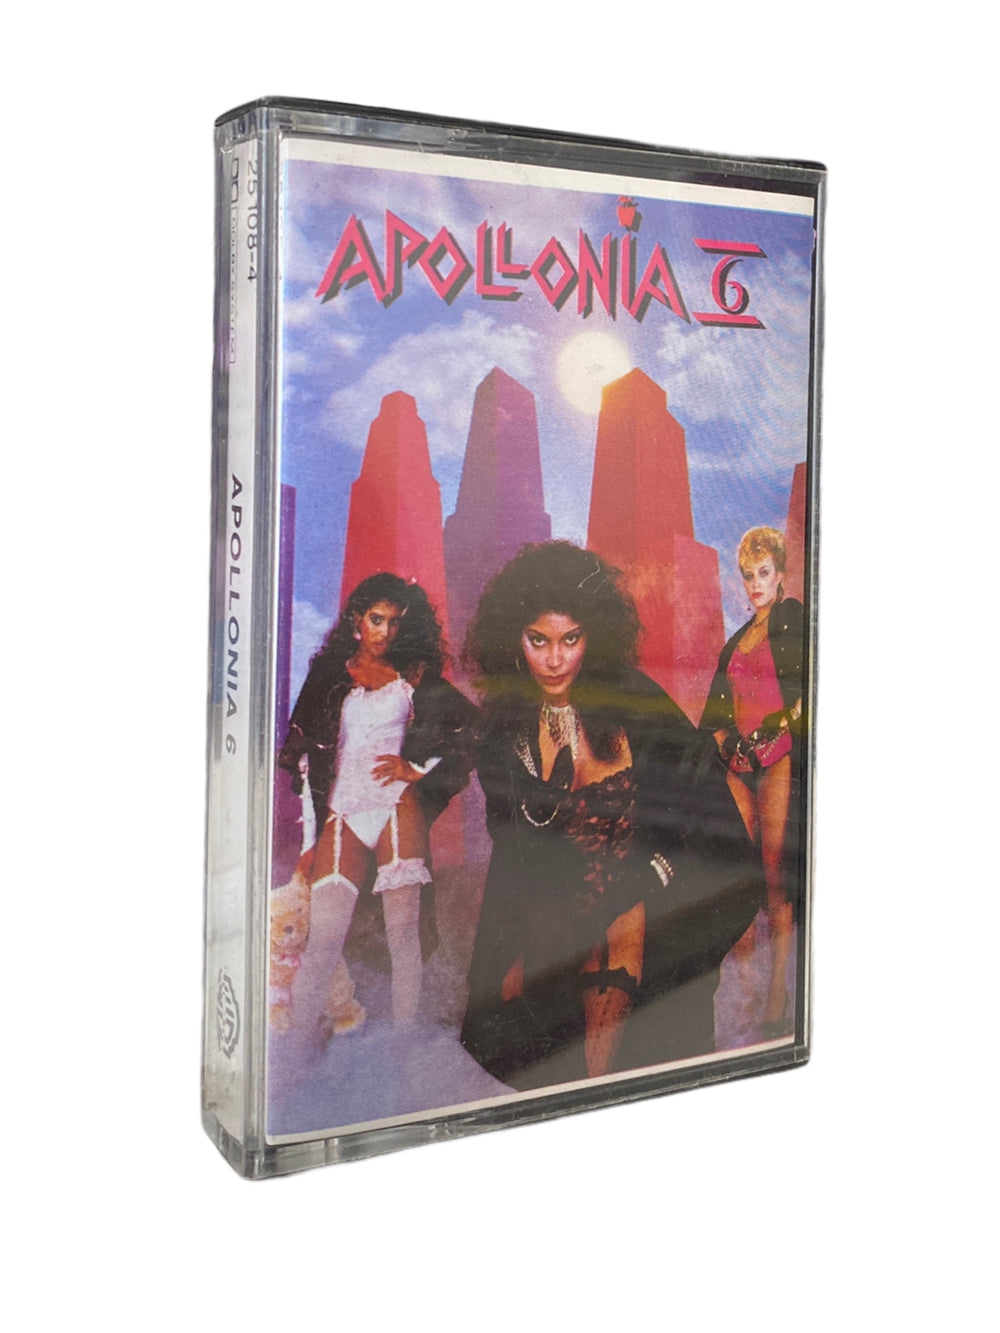 Prince – Apollonia 6 Self Titled Tape Cassette WB Records New Zealand Release Prince